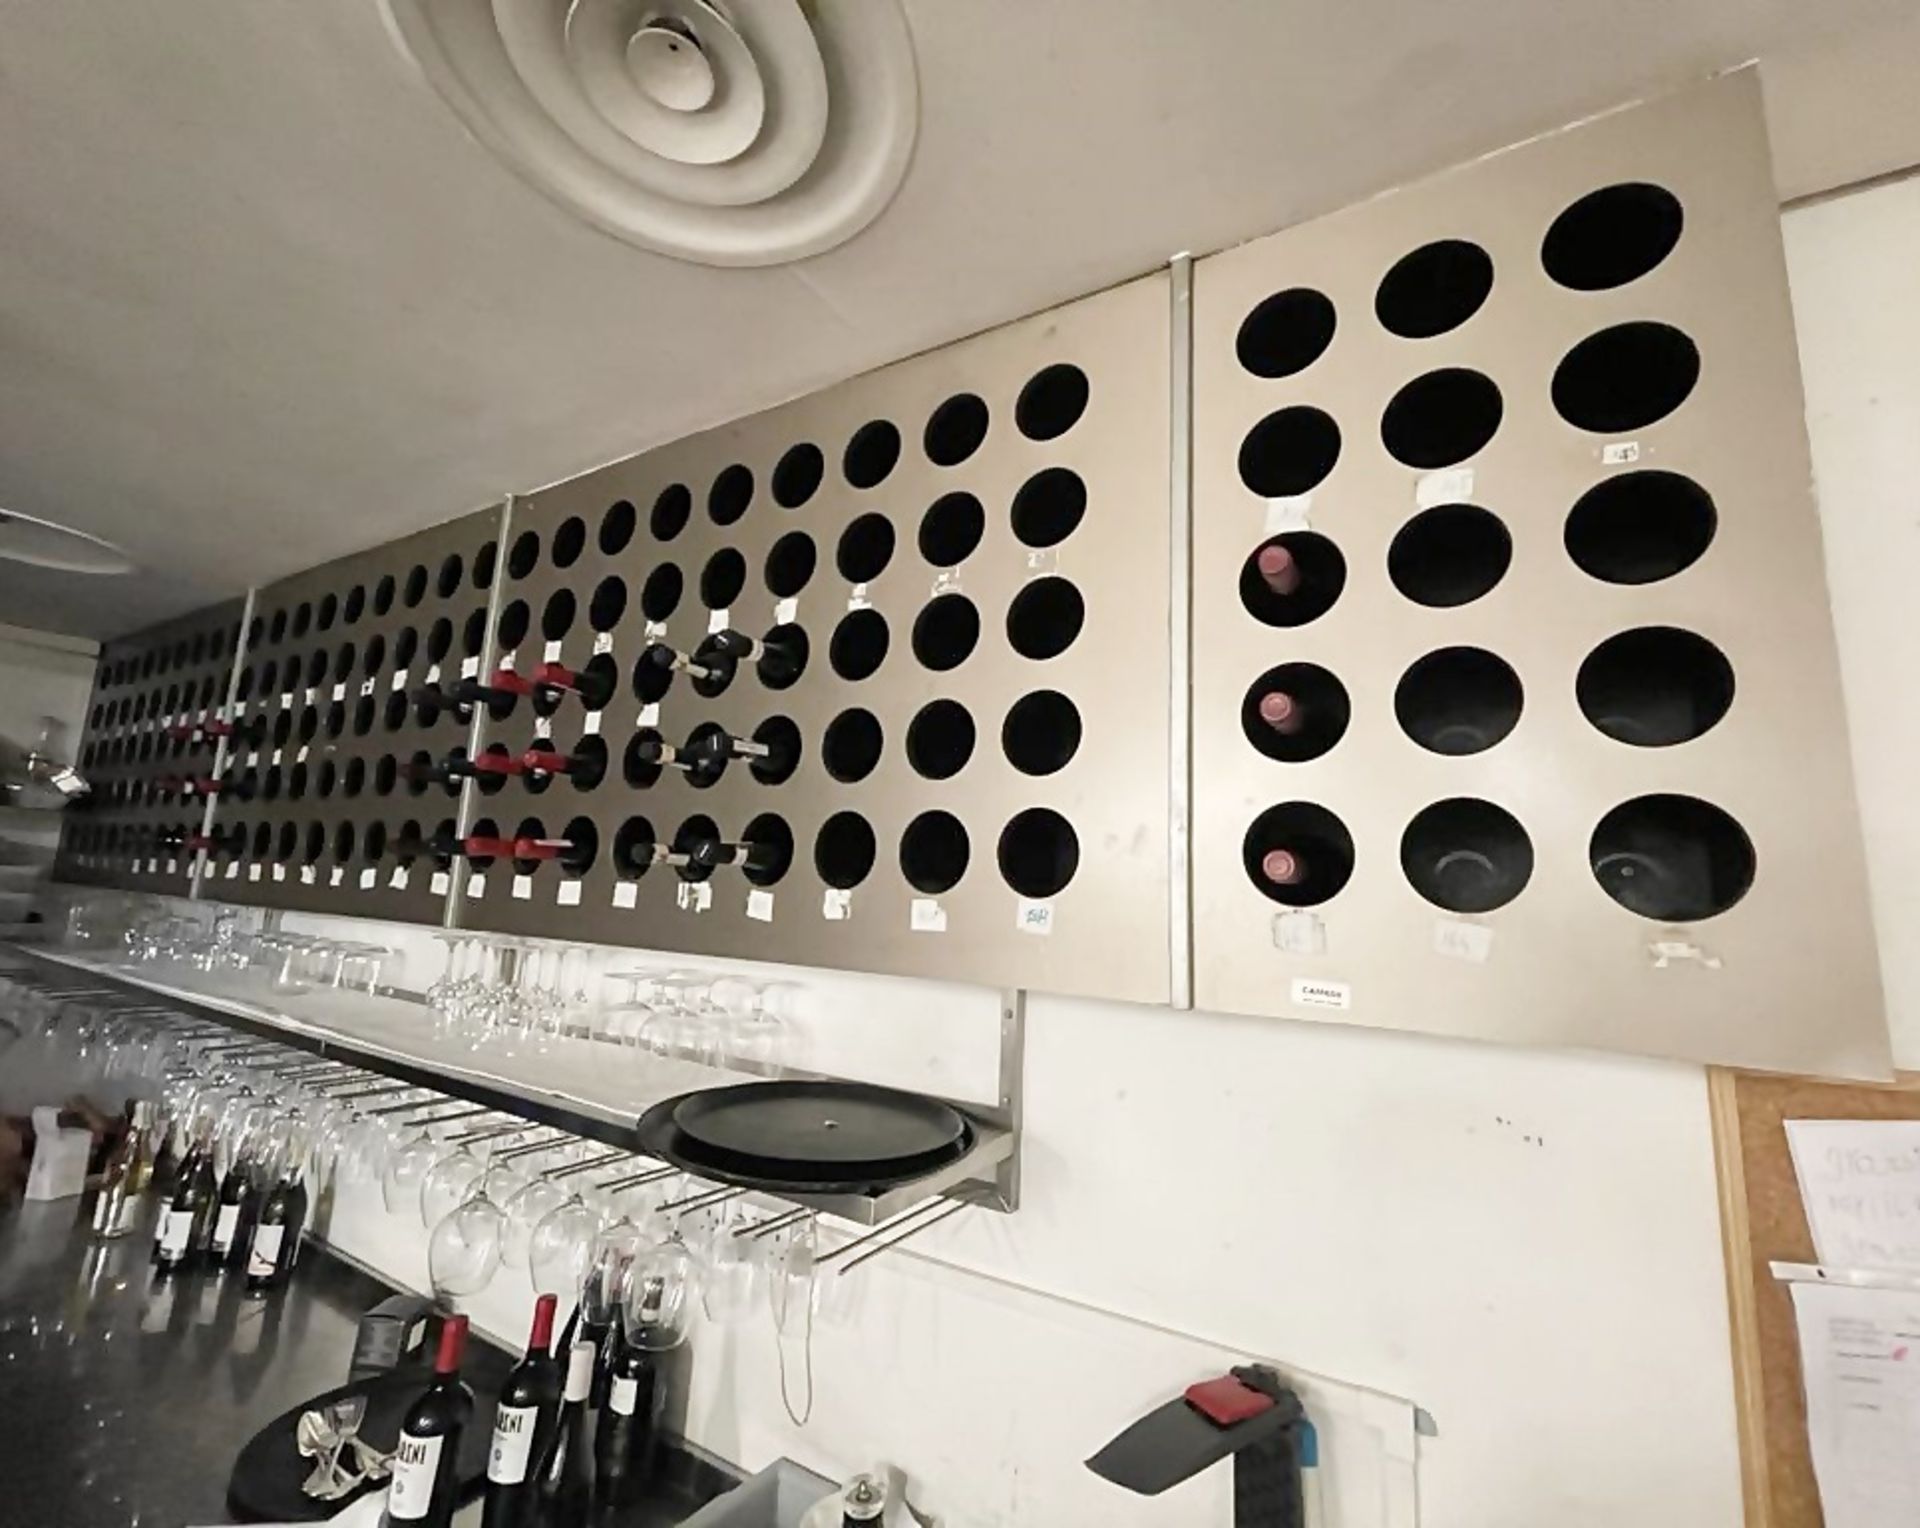 1 x Wall Mounted Wine Rack For 150 Bottles, Supplied In 4 Sections - Dimensions: W440cm x H84cm x